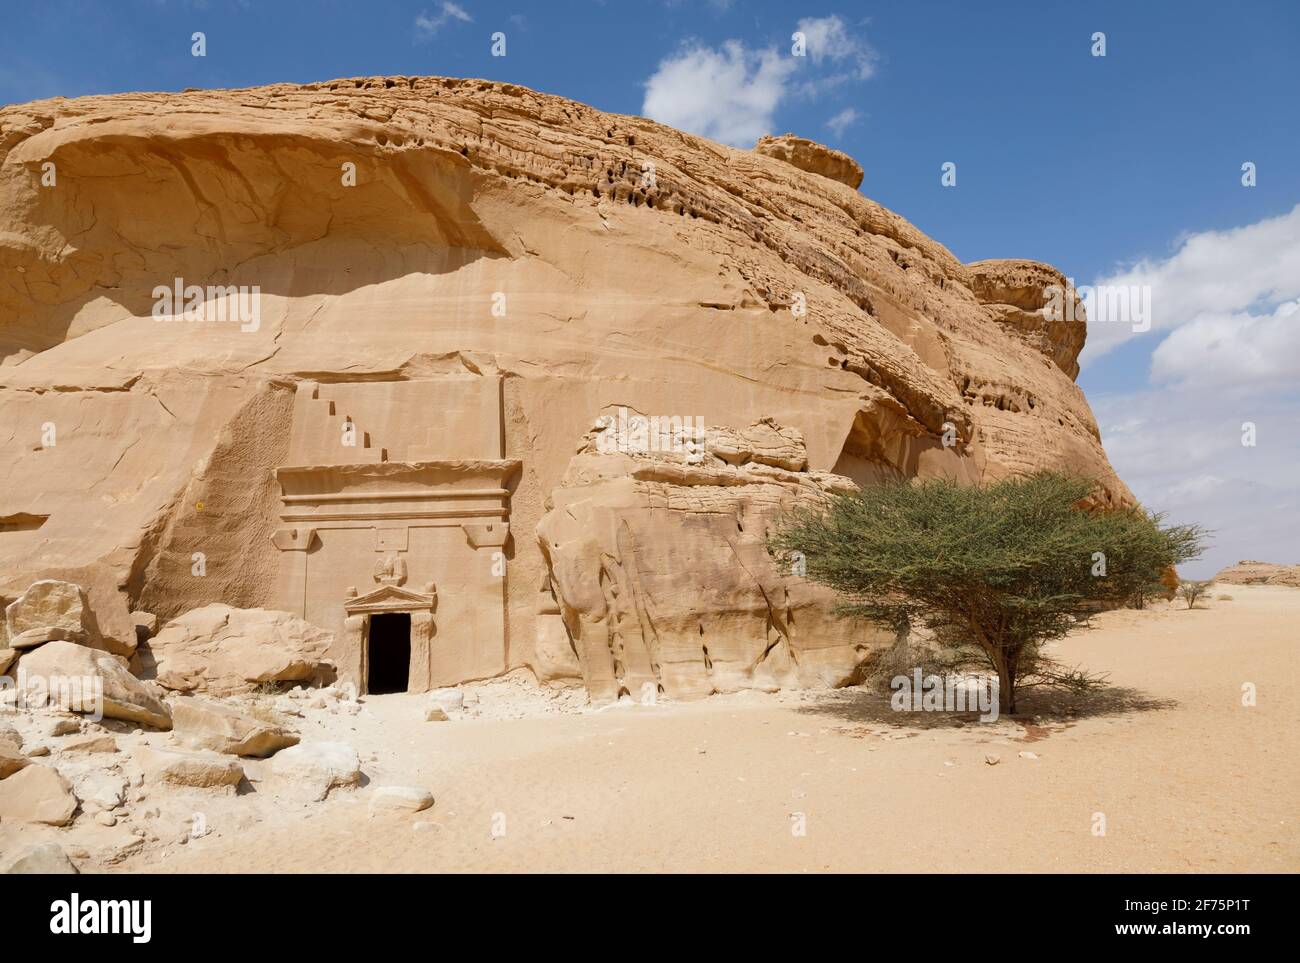 Jabal Al Banat, one of the largest clusters of tombs in Hegra with 29 tombs that have skillfully carved facades on all sides of the sandstone rock, Al Stock Photo